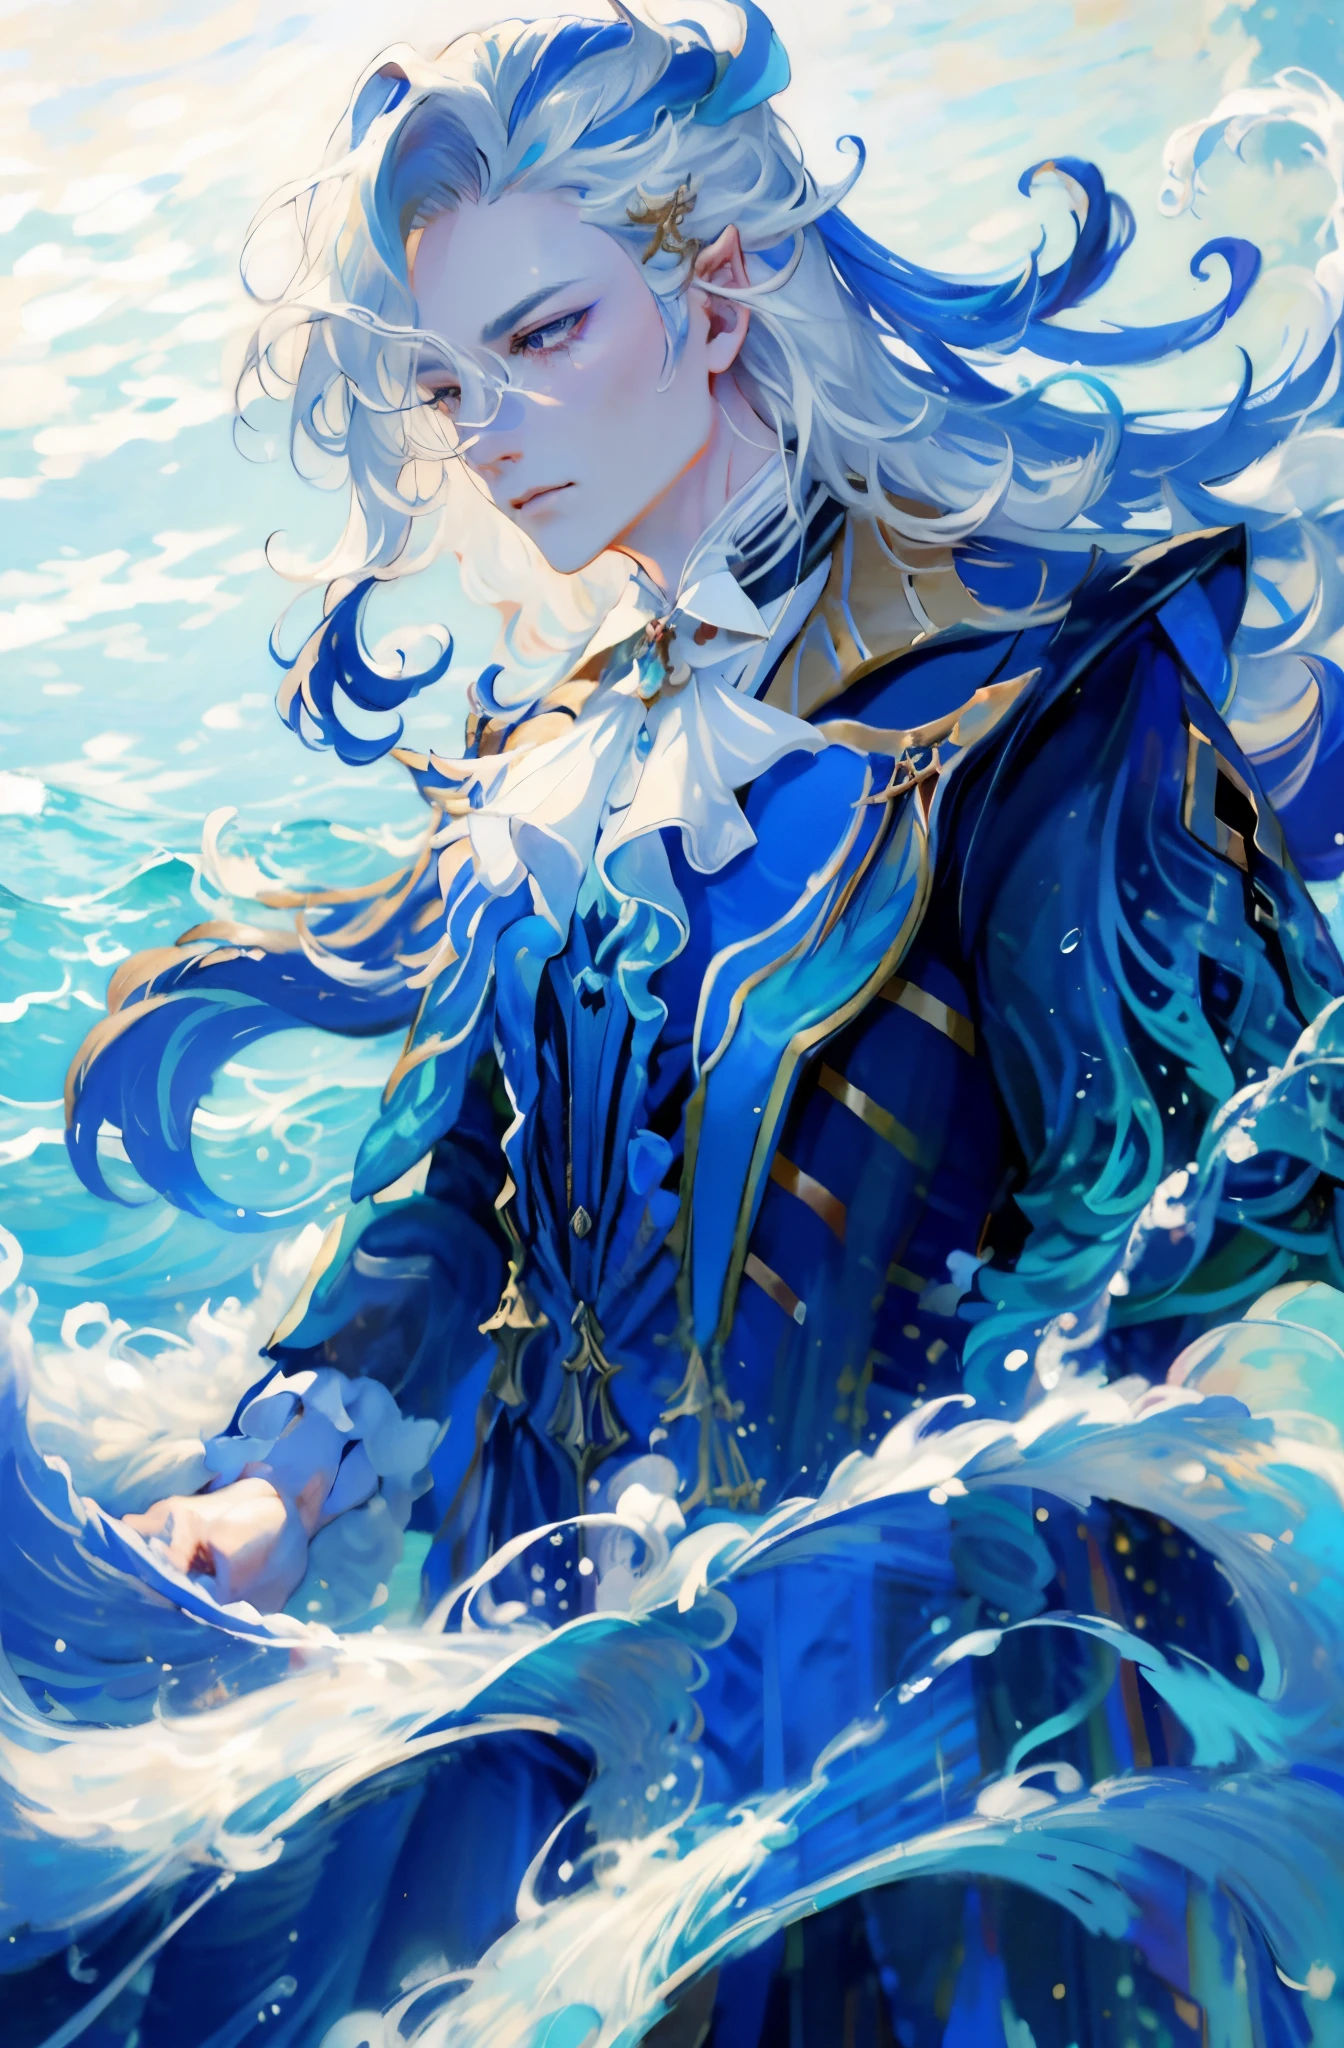 1  mature man colo, long white hair with blue streaks, blue clothes, water waves on background